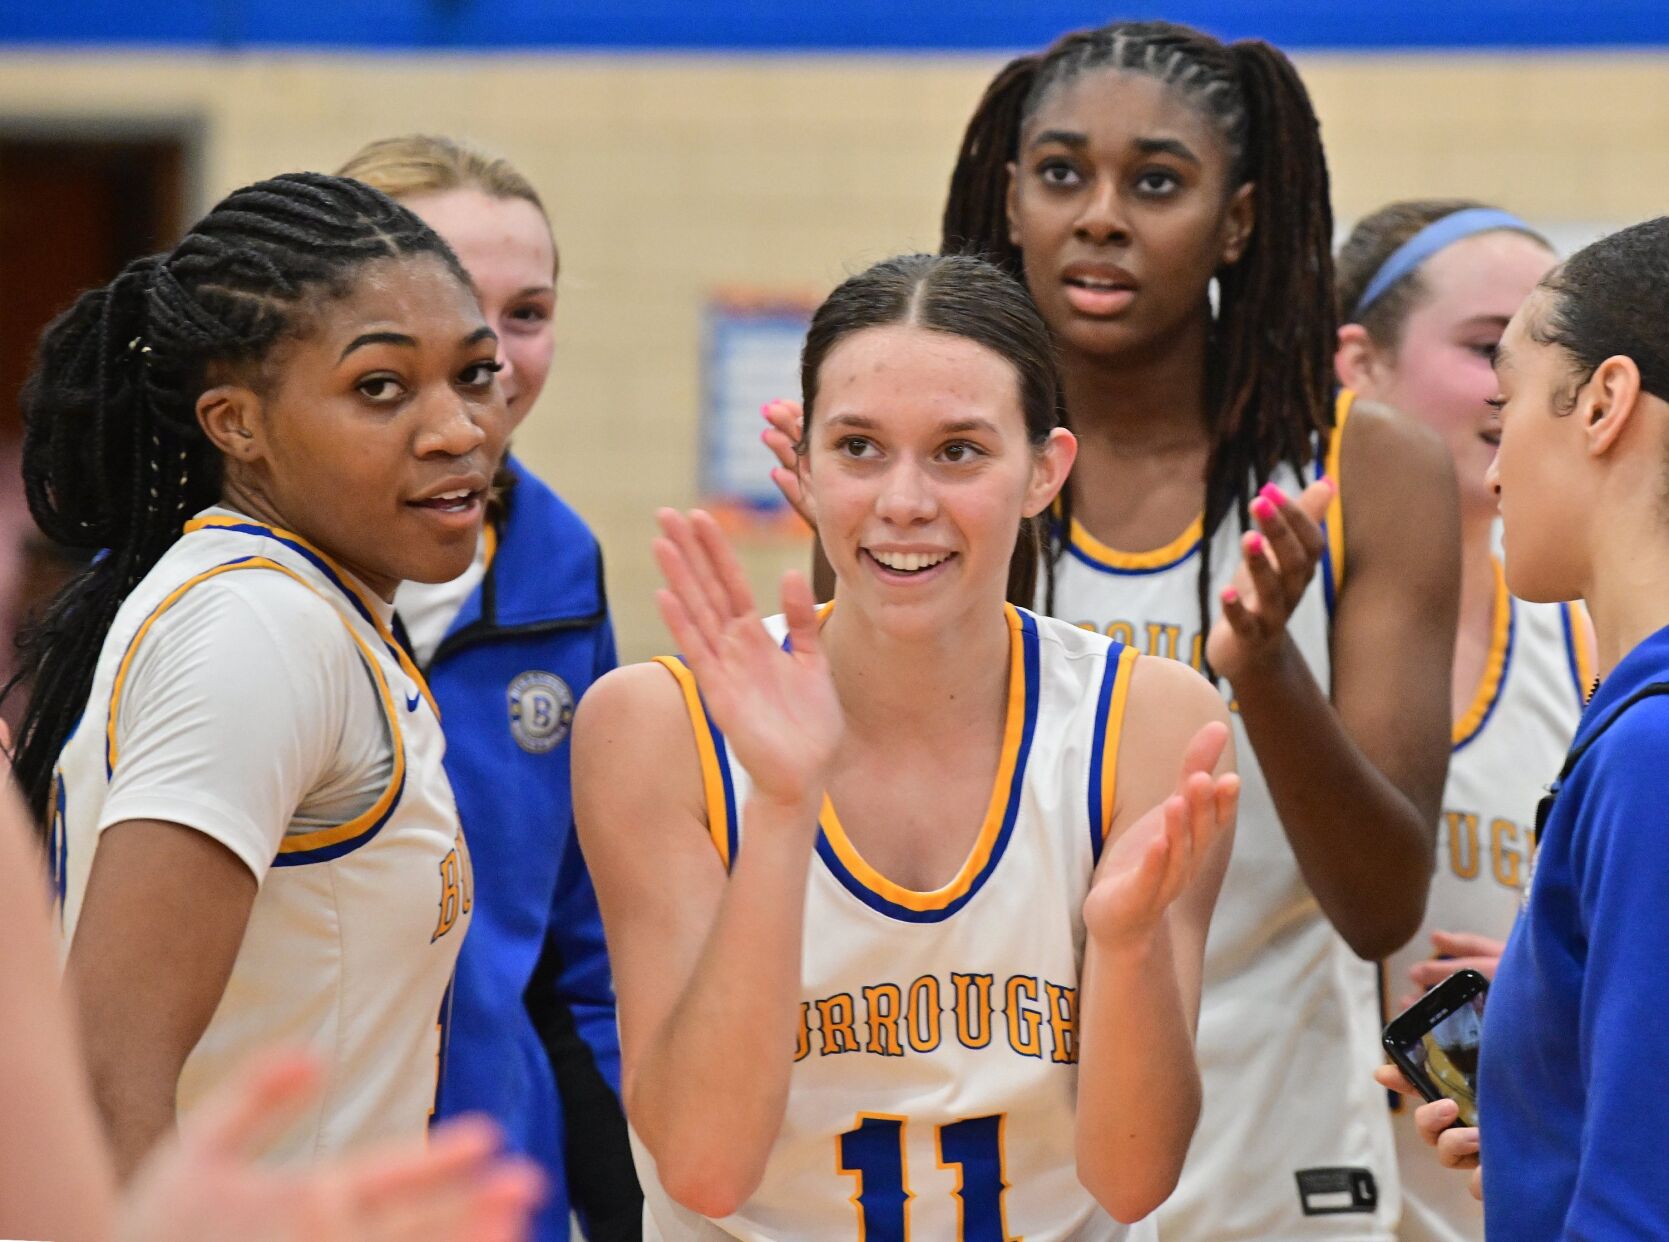 John Burroughs Clinches District Title with Win over Cardinal Ritter, Turner and Douglass Shine